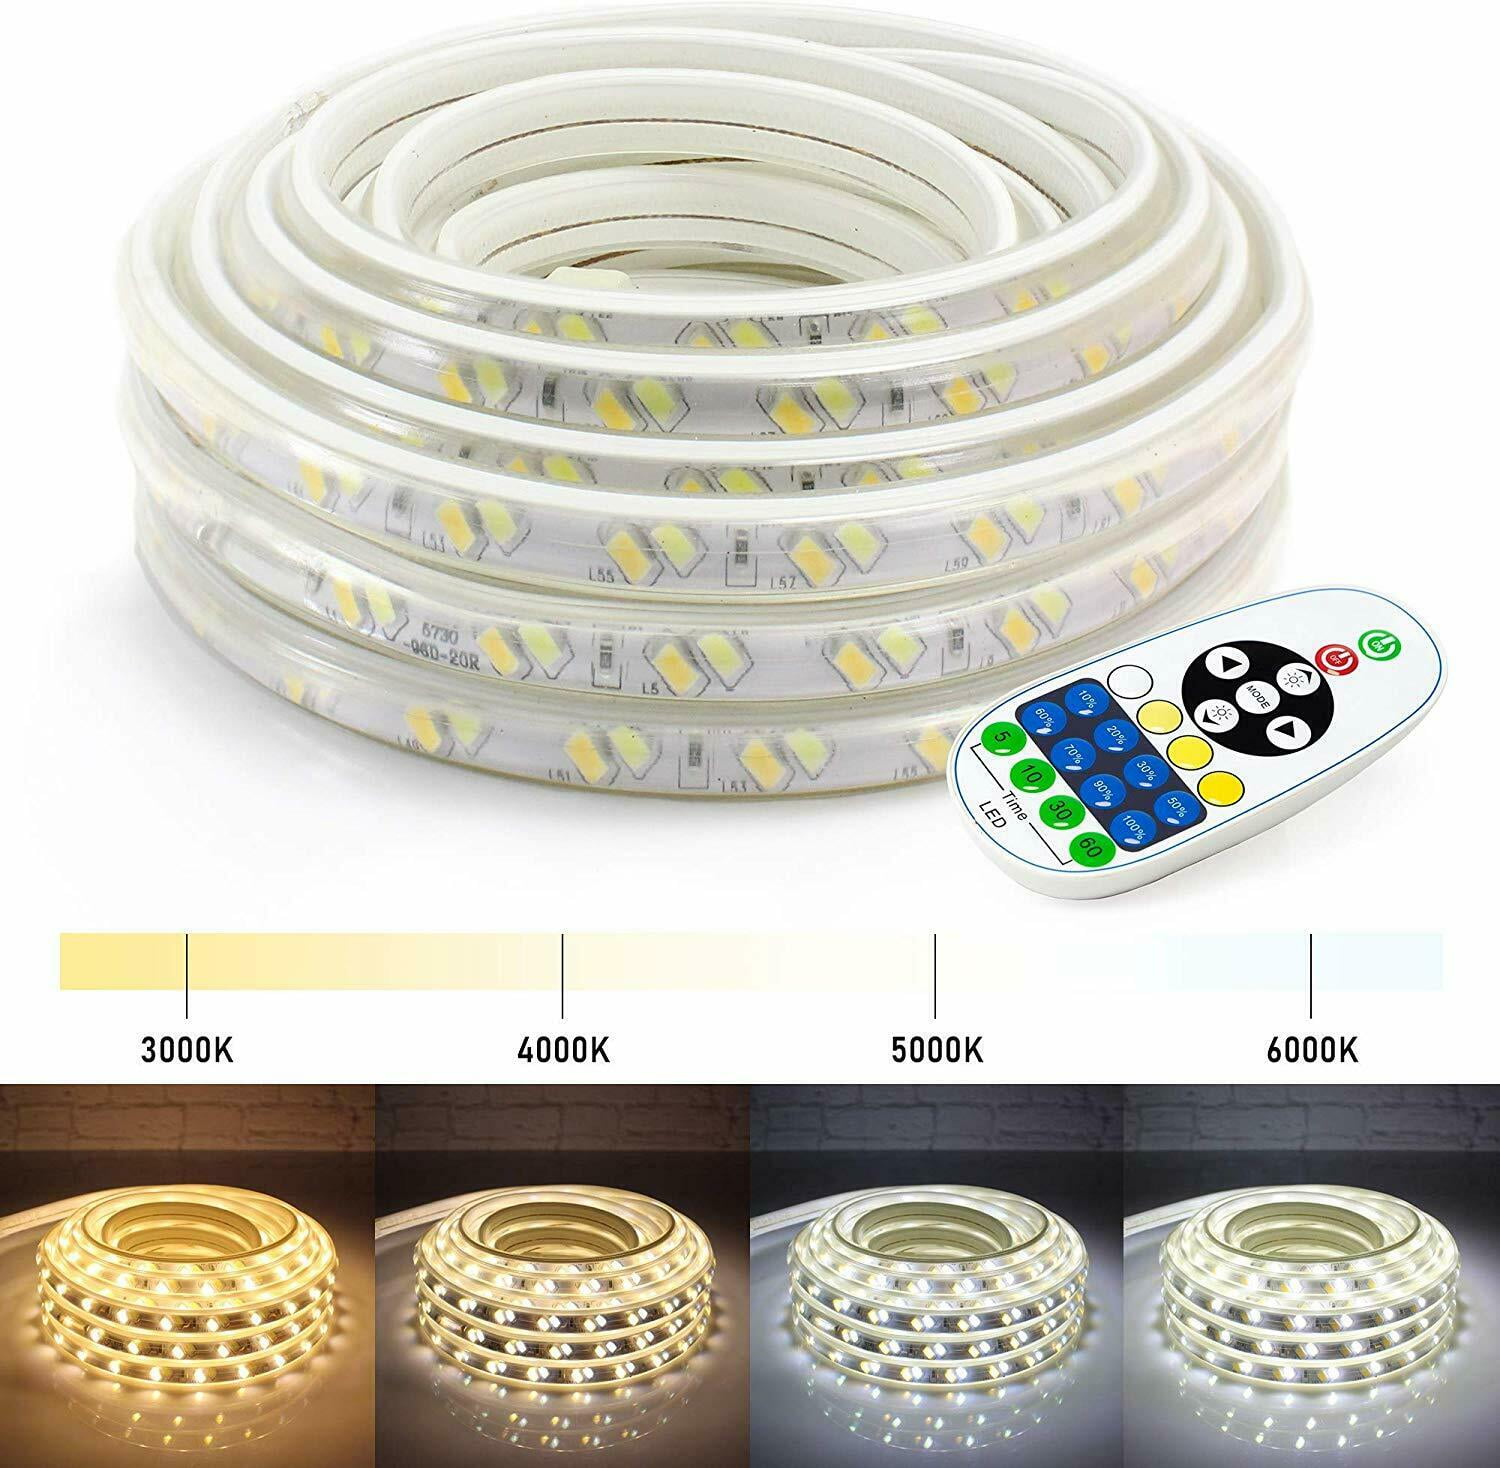 Pengeudlån Thorny Kategori West Ivory Warm White to Cool White SMD 5630 LED Flexible Dimmable  Indoor/Outdoor Light Strip (4 Colors) Remote Timer - Walmart.com